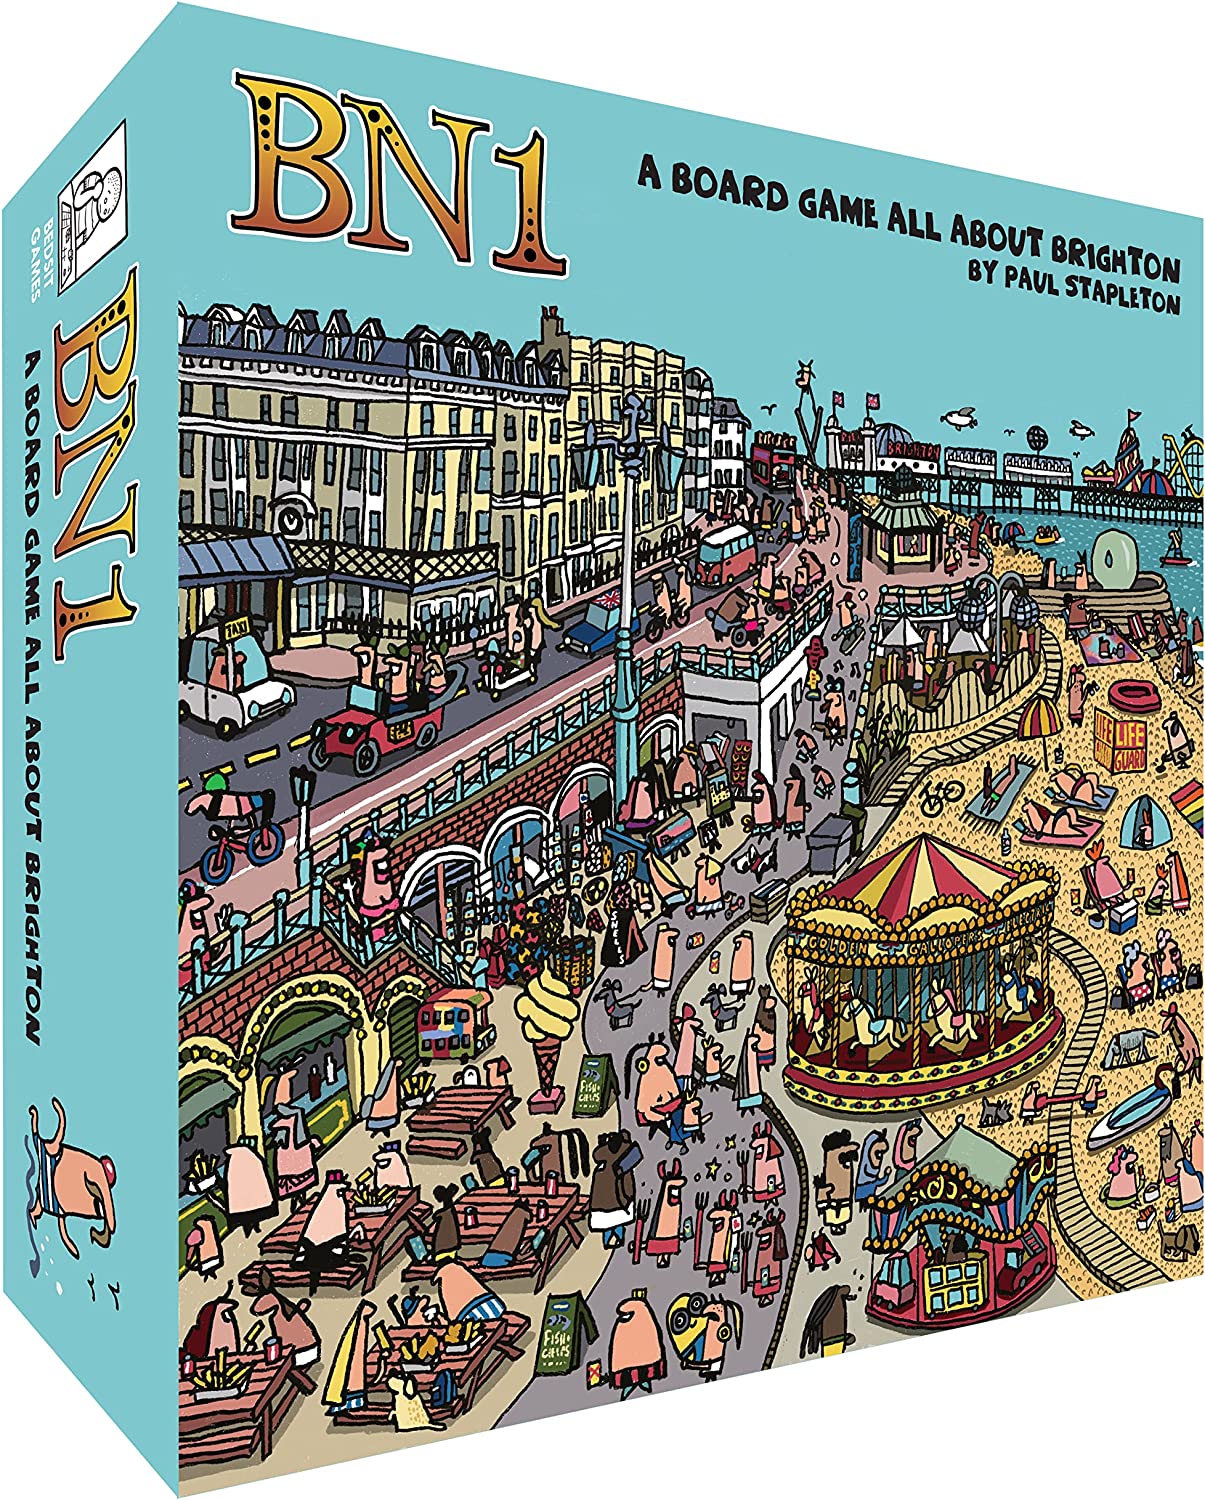 BN1 a game about Brighton